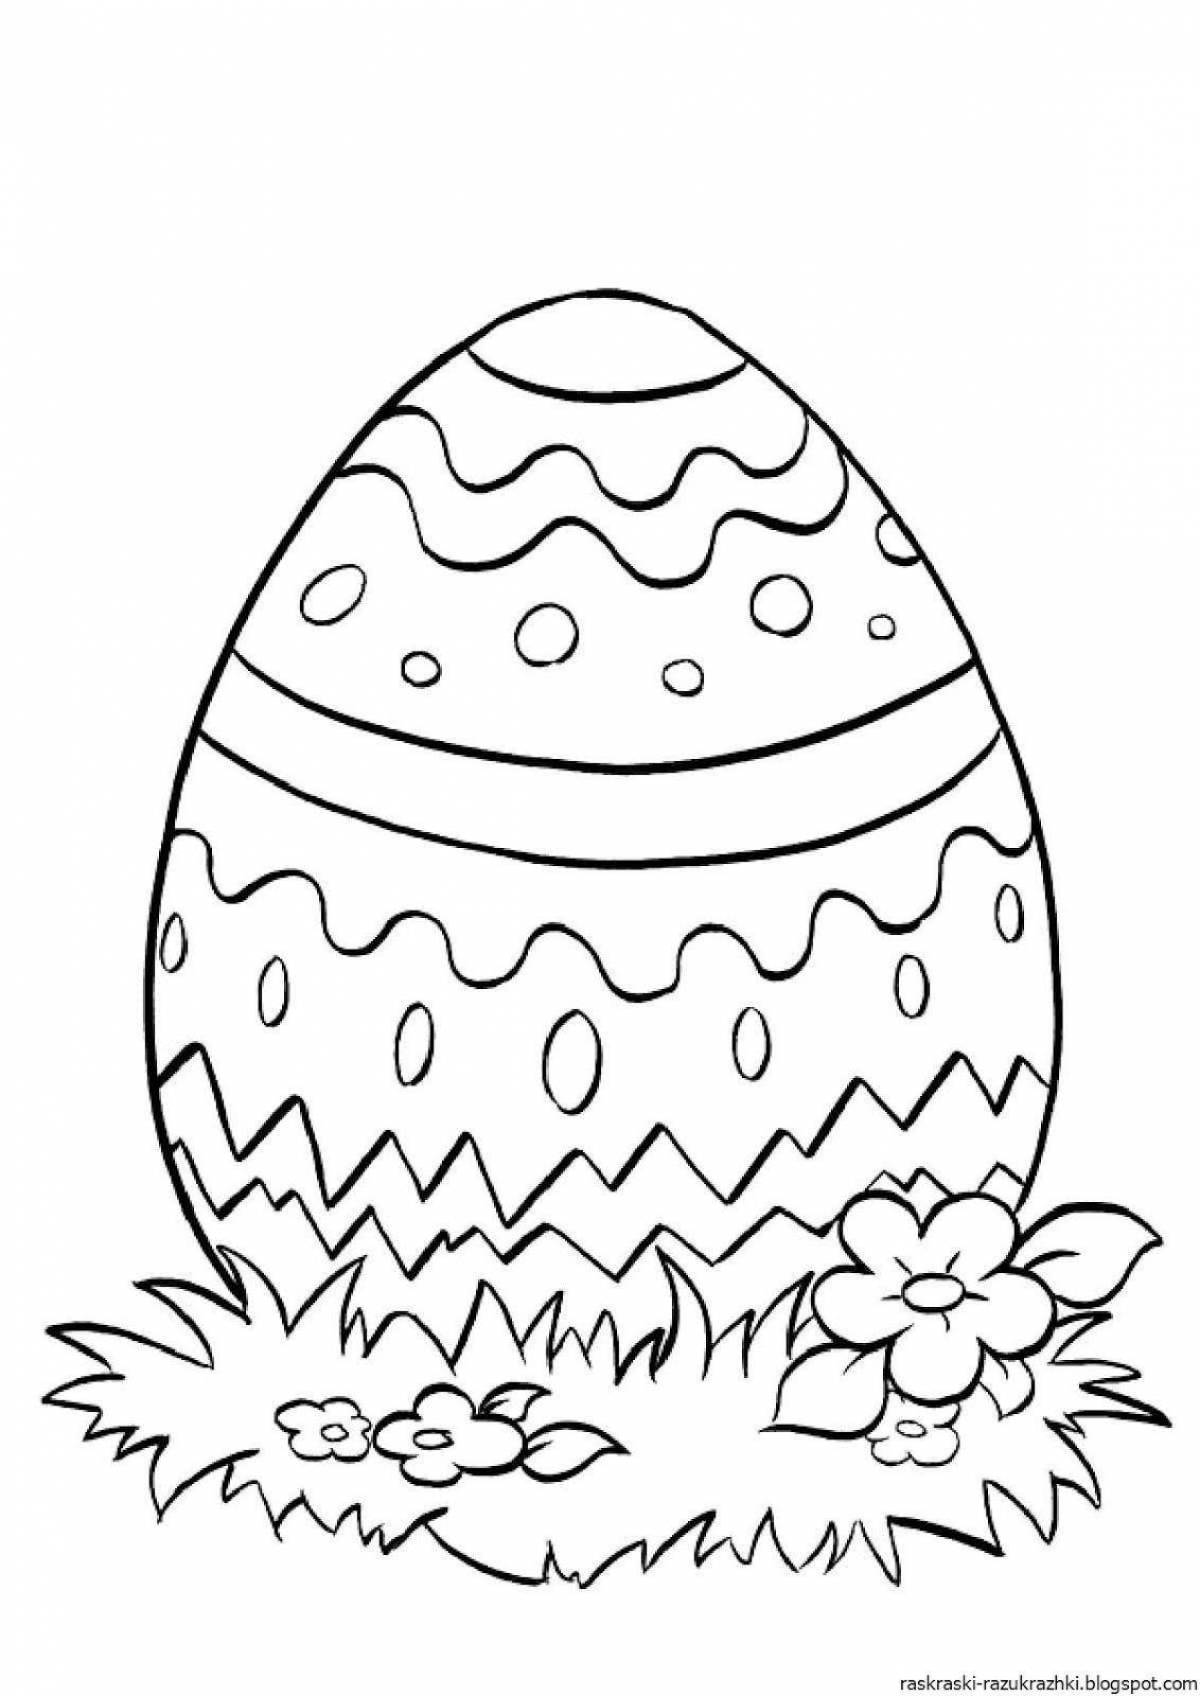 Creative Easter coloring book for kids